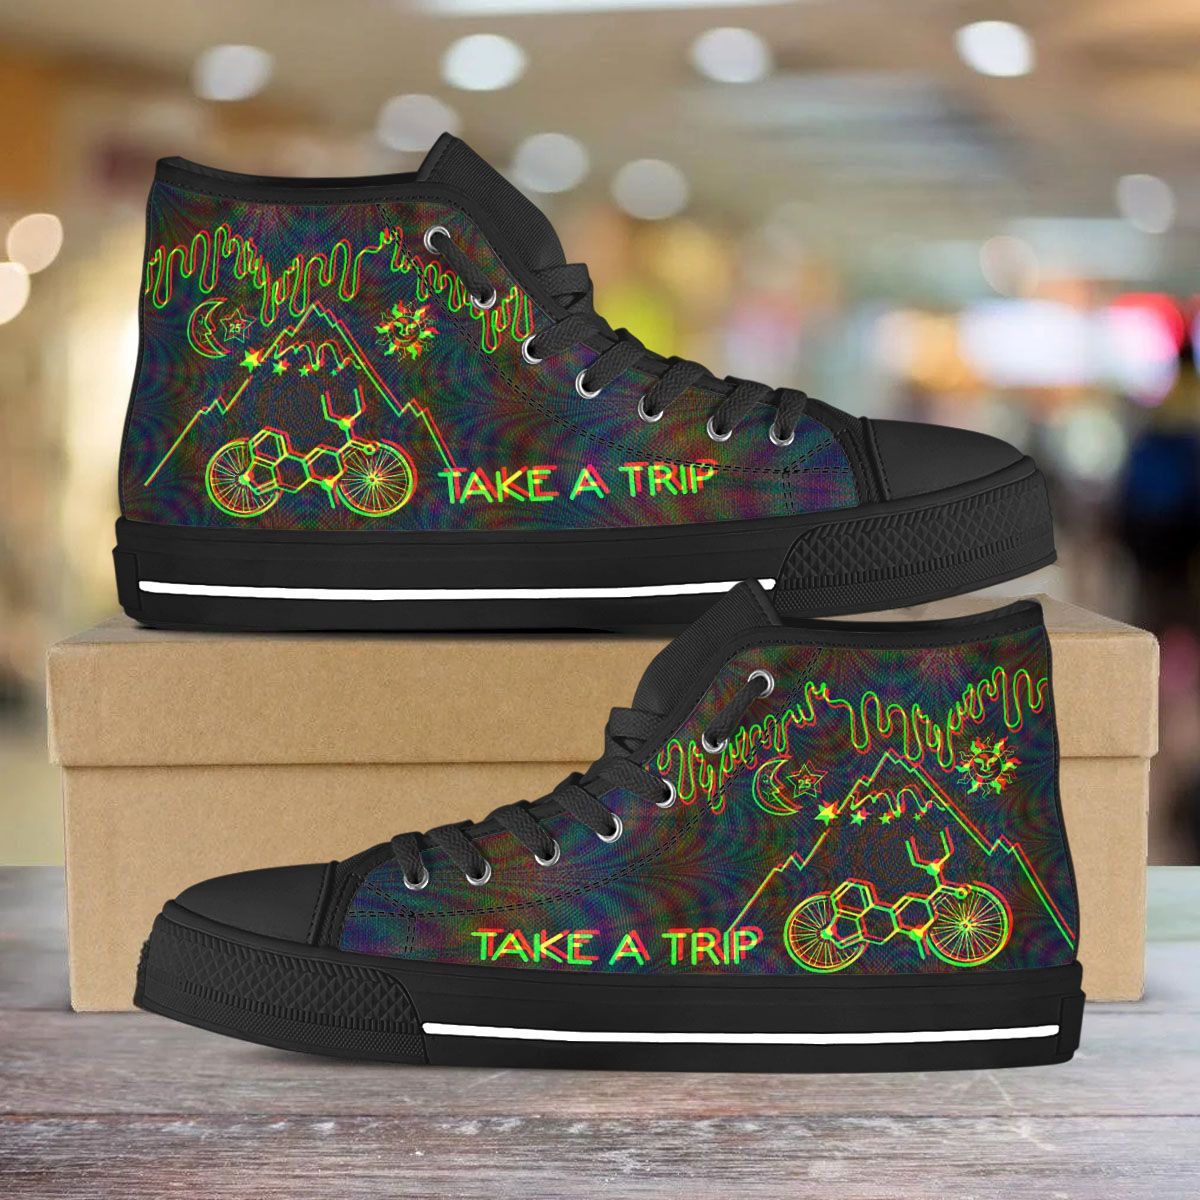 Bicycle day take a trip high top shoes – Hothot-th 280920